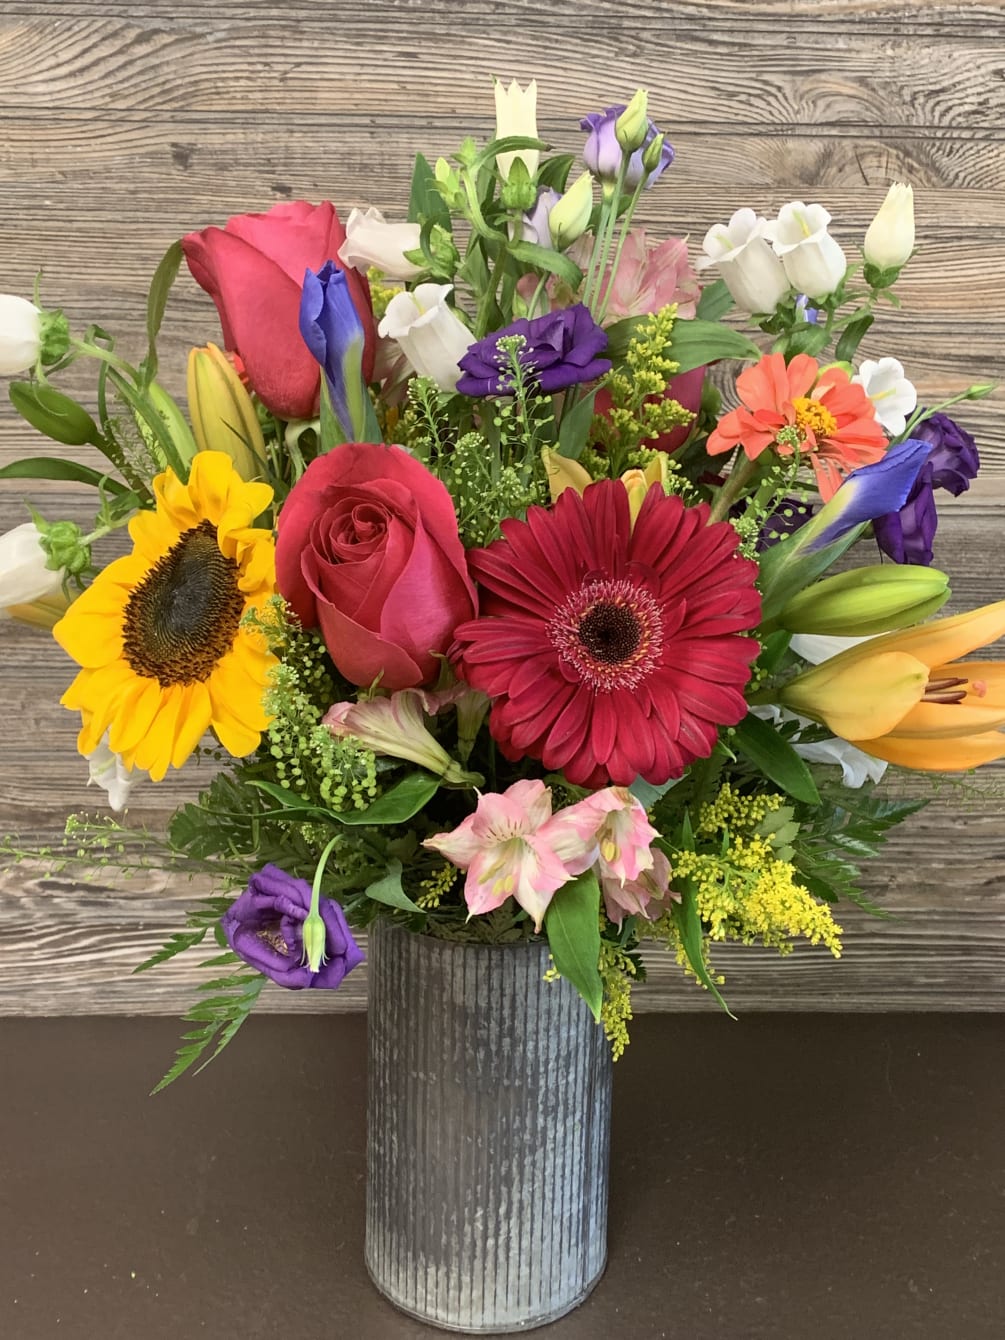 A mixture of summer blooms in a metal corrugated vase.(7hx4w)
Mixture to include